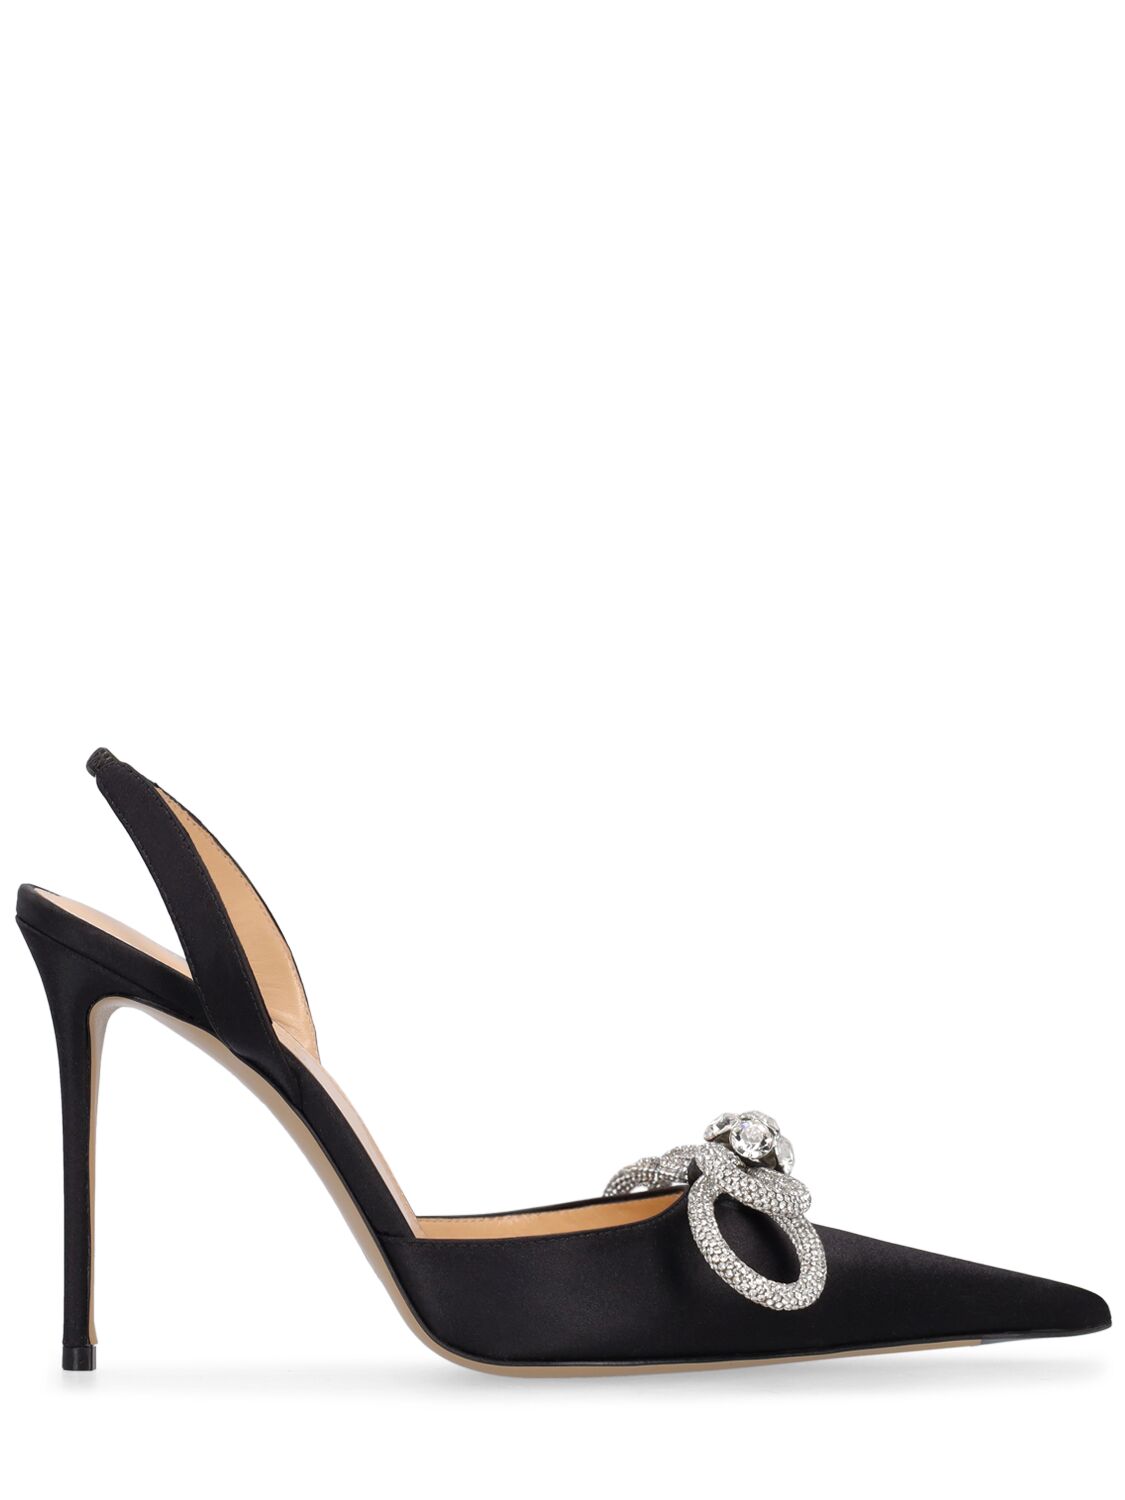 Shop Mach & Mach 110mm Double Bow Satin Slingback Pumps In Black